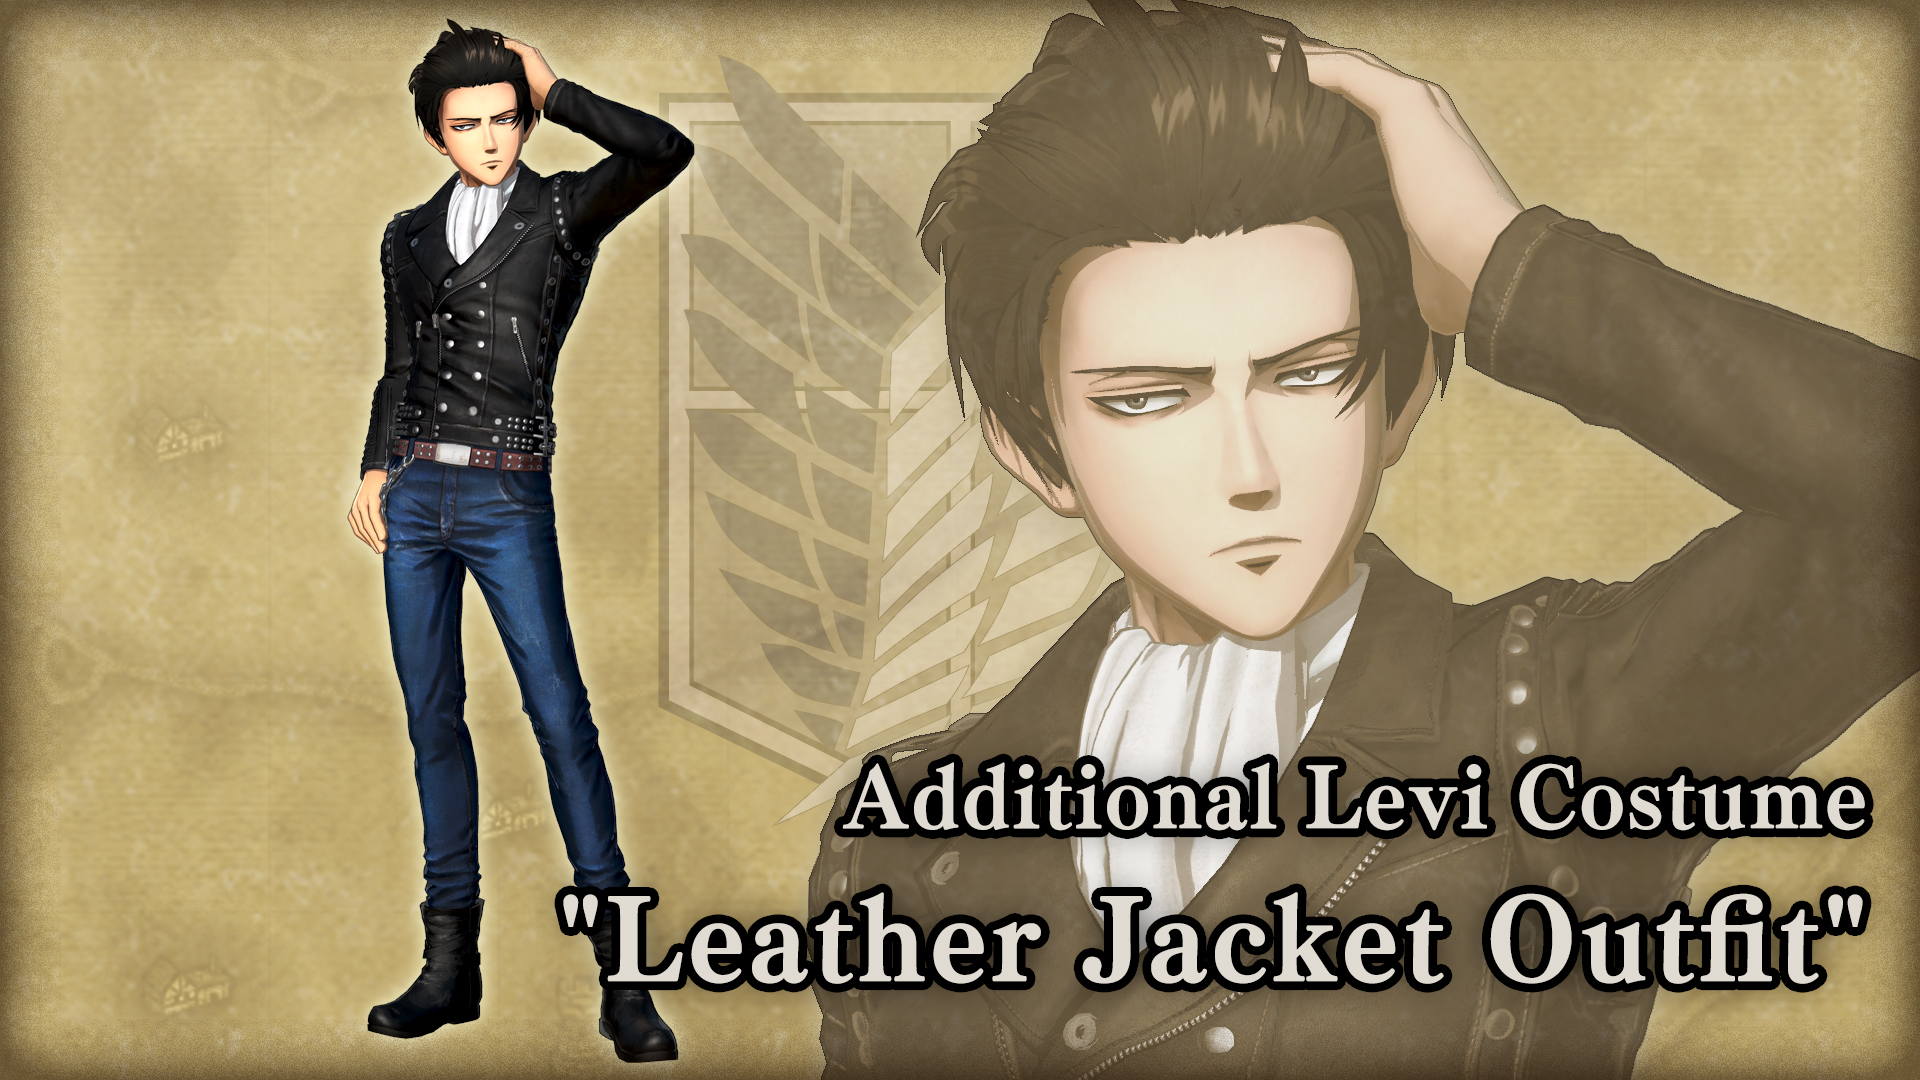 Additional Levi Costume: "Leather Jacket Outfit"